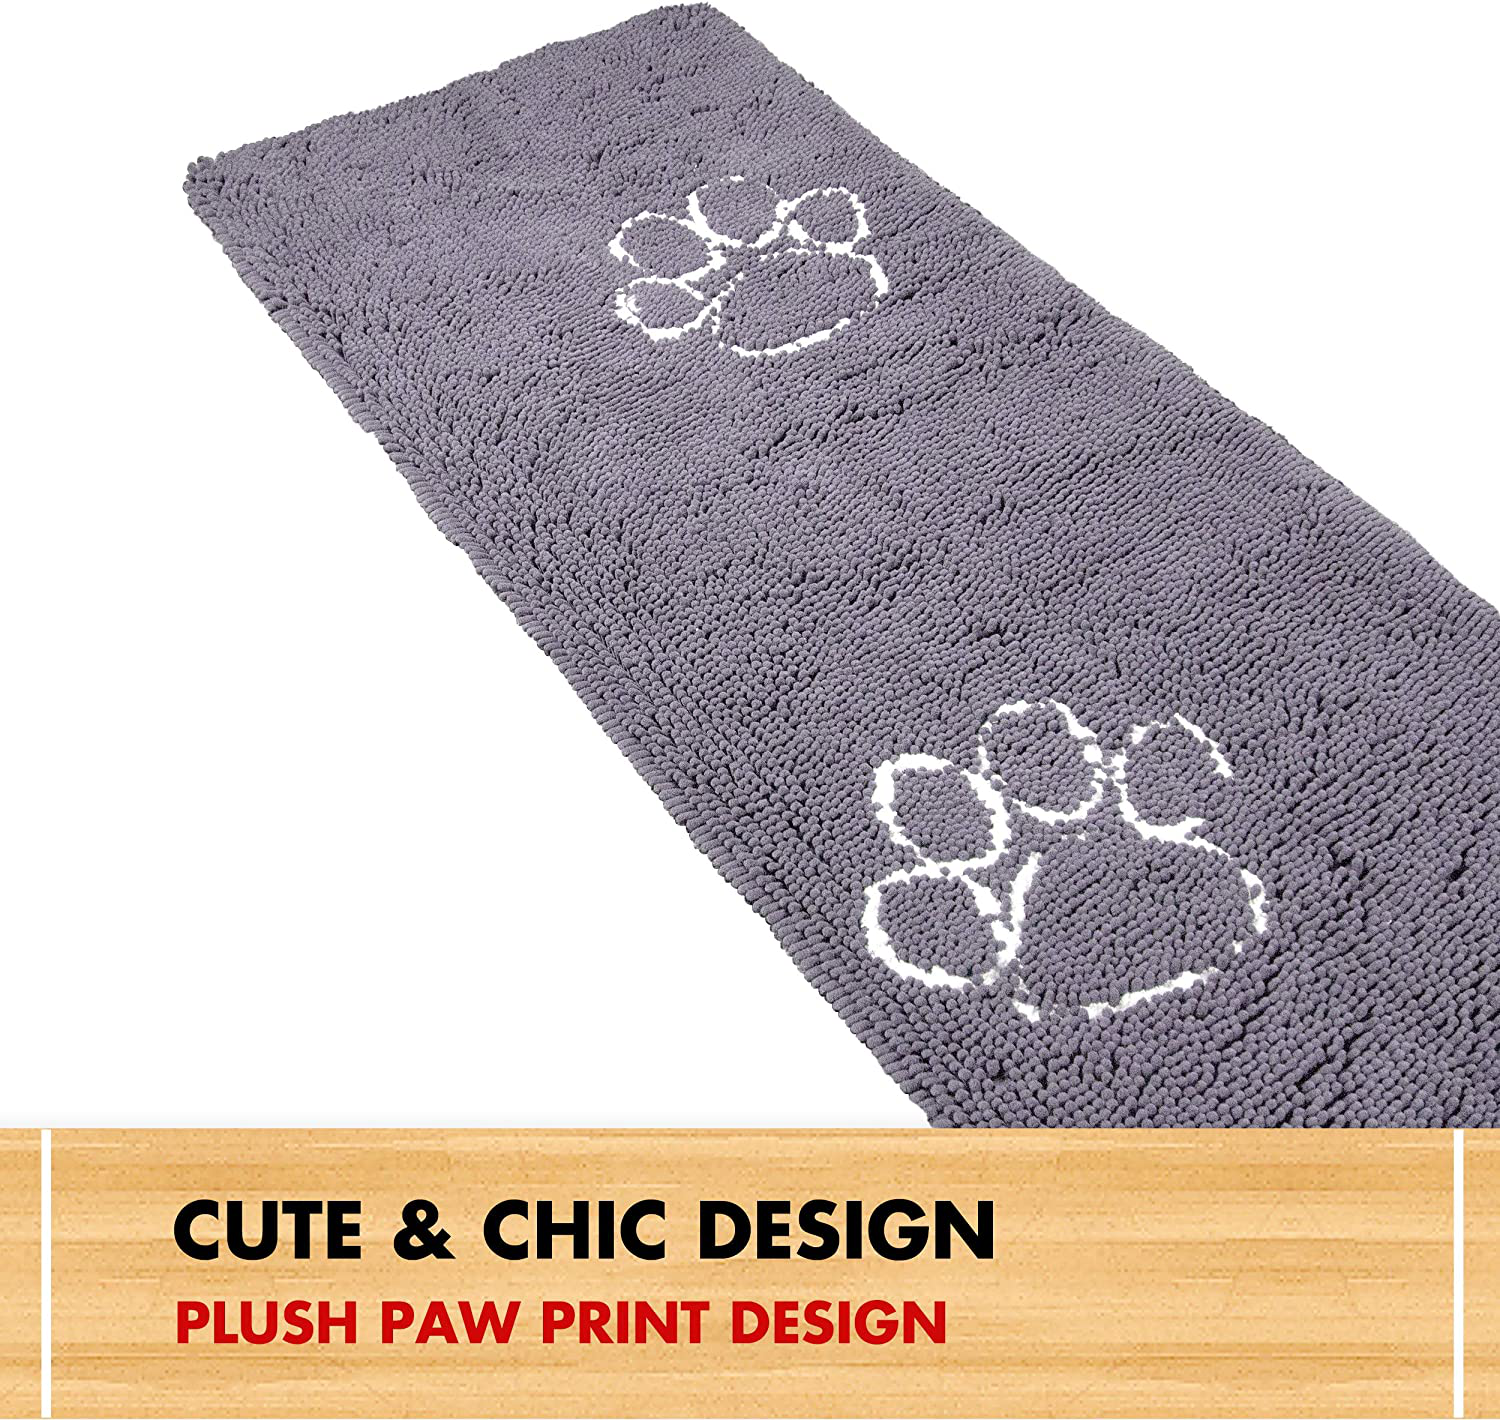 My Doggy Place - Ultra Absorbent Microfiber Dog Door Mat, Durable, Quick Drying, Washable, Prevent Mud Dirt, Keep Your House Clean (Violet W/Paw Print, Hallway Runner) - 8' X 2' Feet